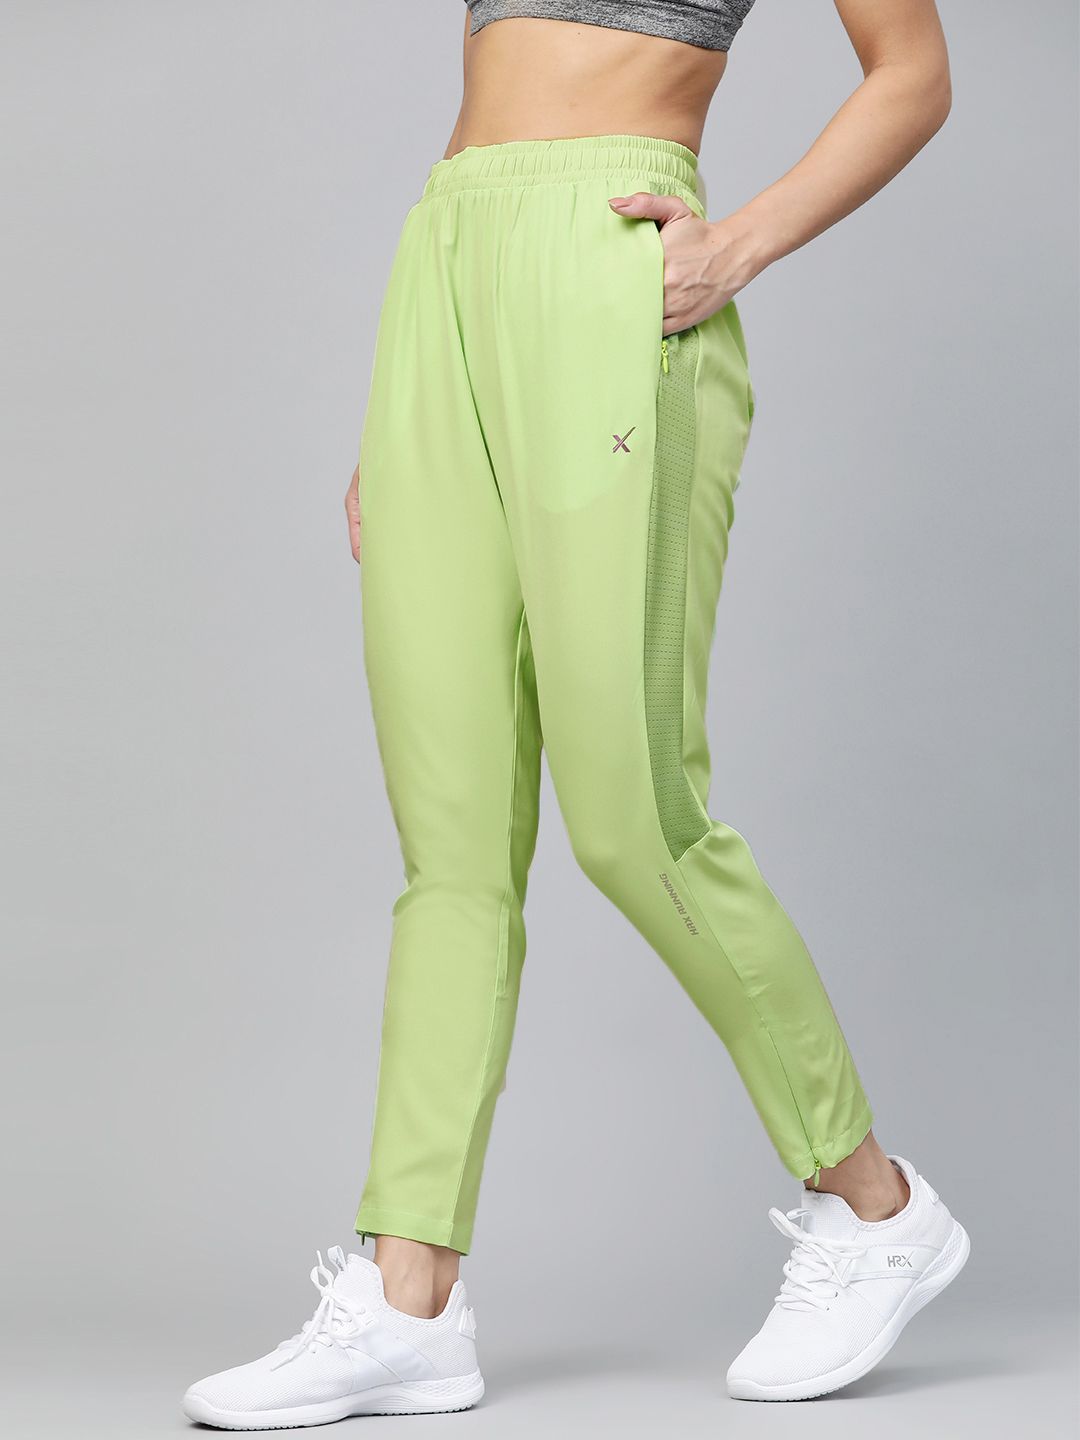 HRX by Hrithik Roshan Women Sap Green Slim Fit Rapid-Dry Antimicrobial Running Track Pants Price in India